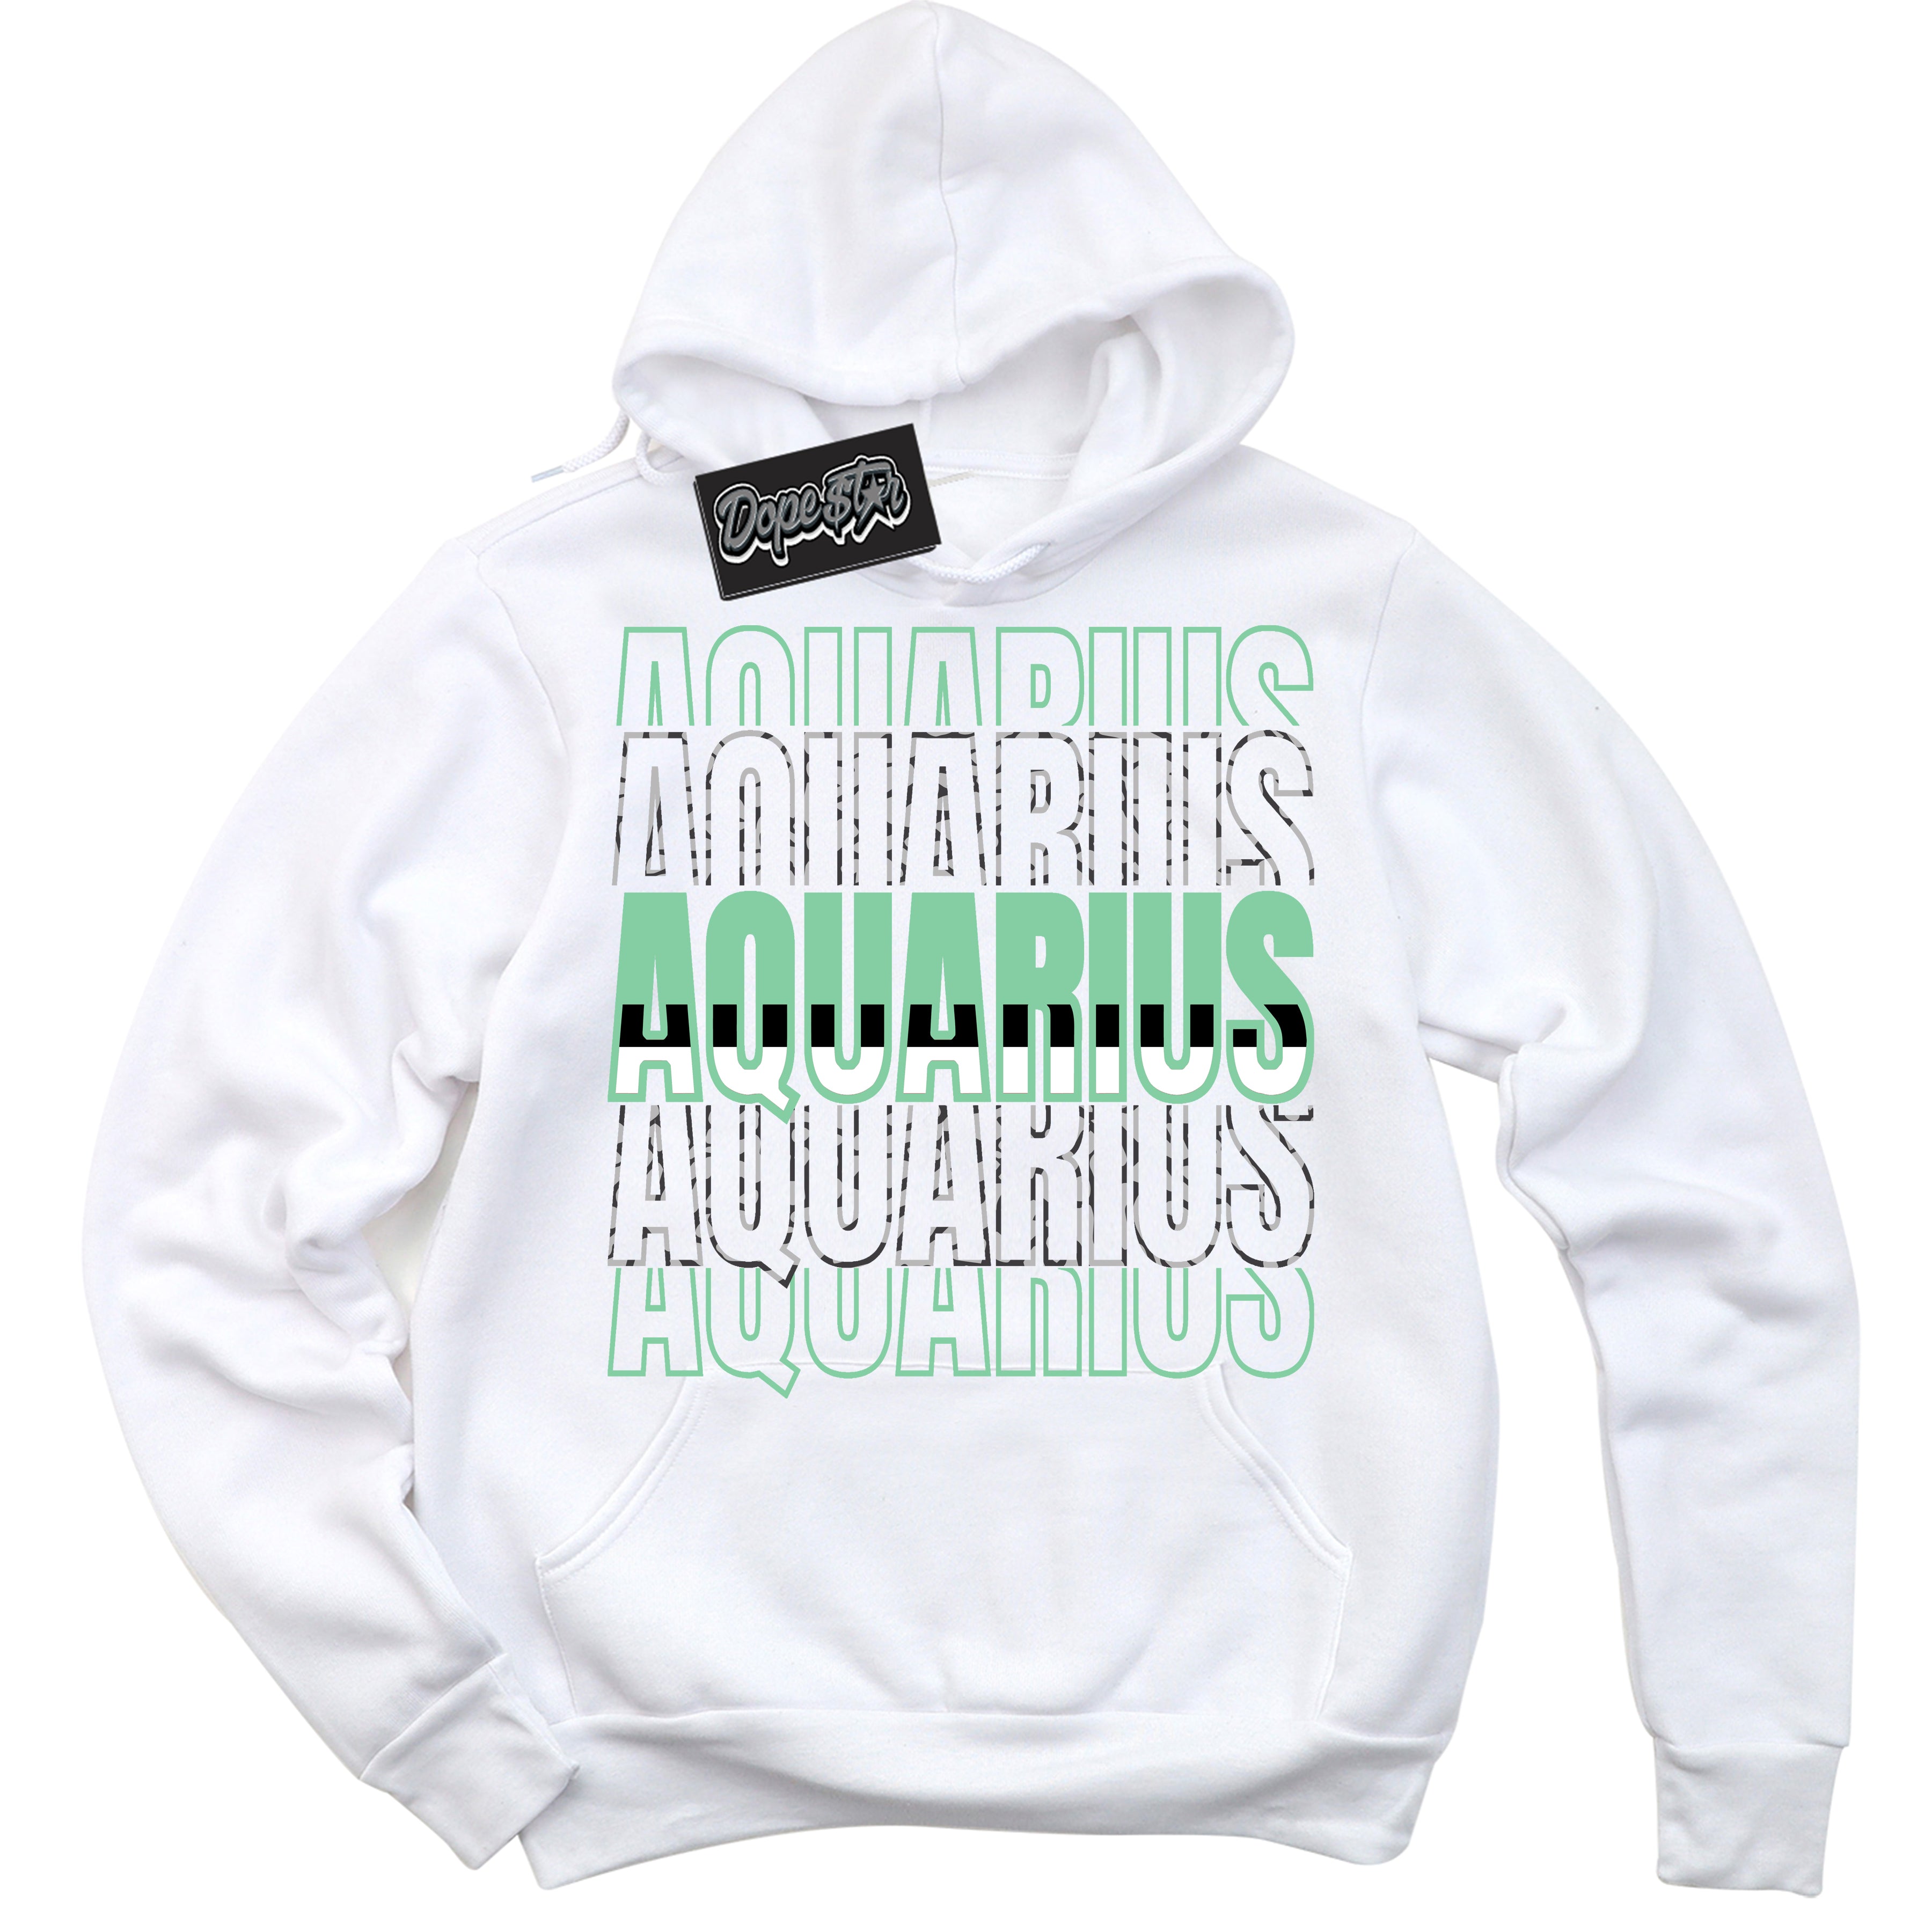 Cool White Graphic DopeStar Hoodie with “ Aquarius “ print, that perfectly matches Green Glow 3s sneakers